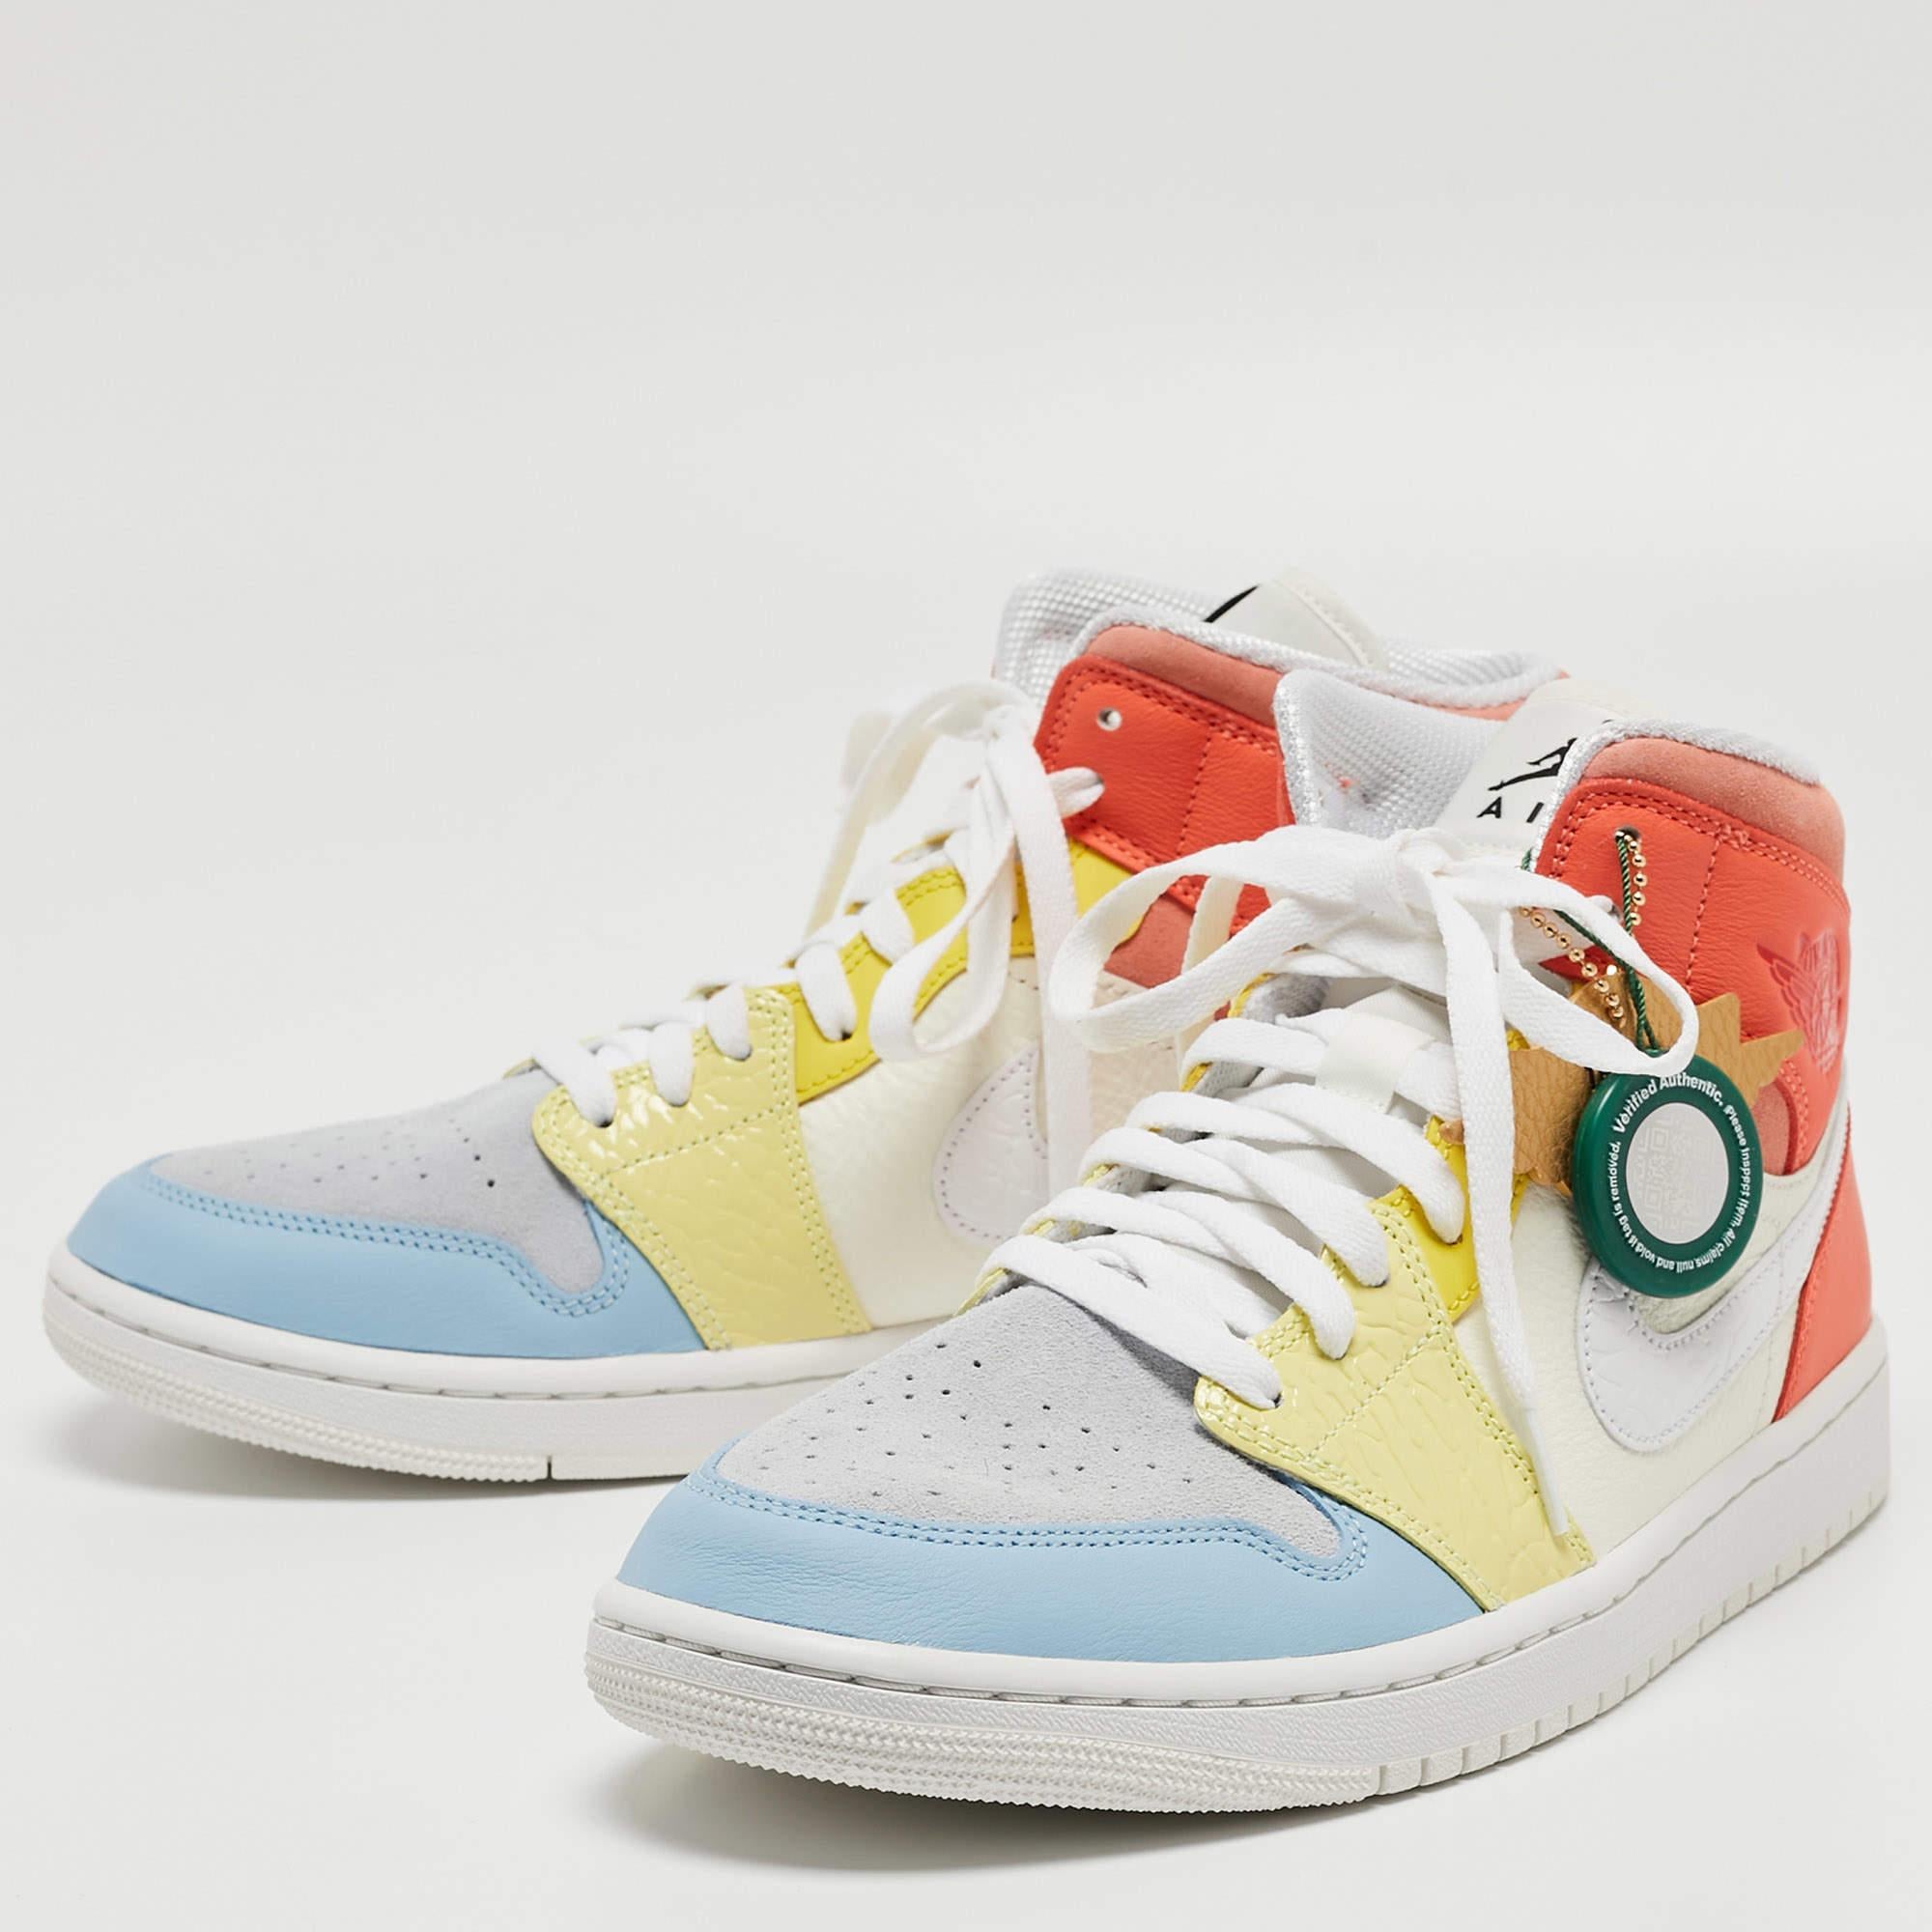 Air Jordan Multicolor Leather and Suede Jordan 1 Mid To My First Coach Sneakers  2